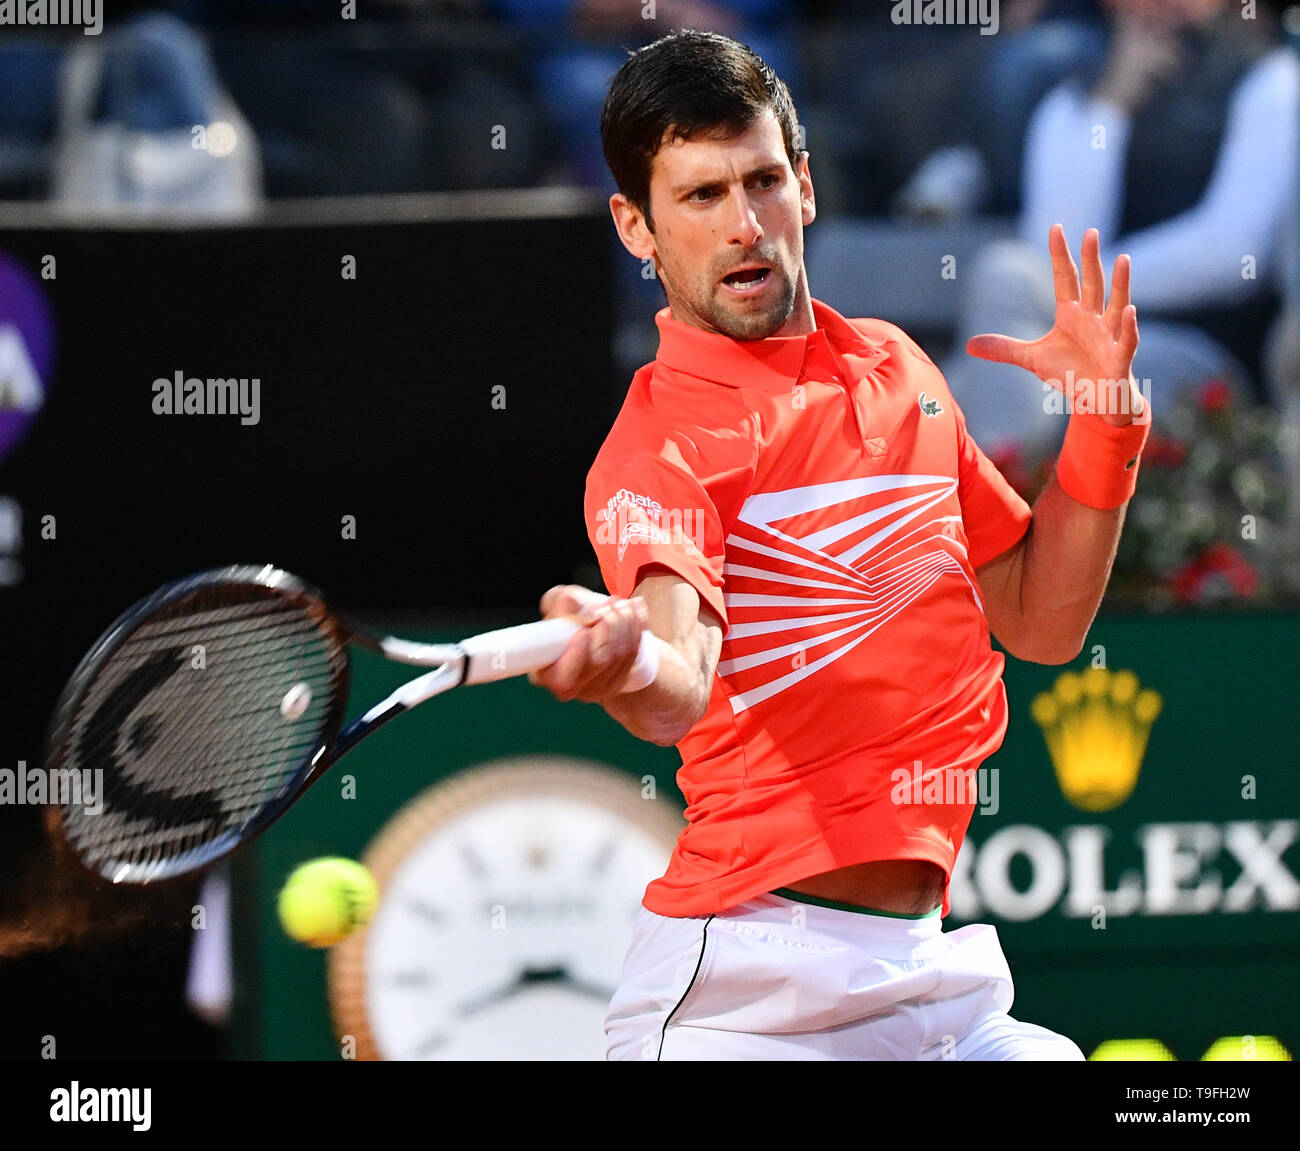 Rome, Italy. 18th May, 2019. Novak Djokovic of Serbia returns the ball  during the men's singles semifinal match against Argentina's Diego  Schwartzman at the Italian Open Tennis tournament in Rome, Italy, on